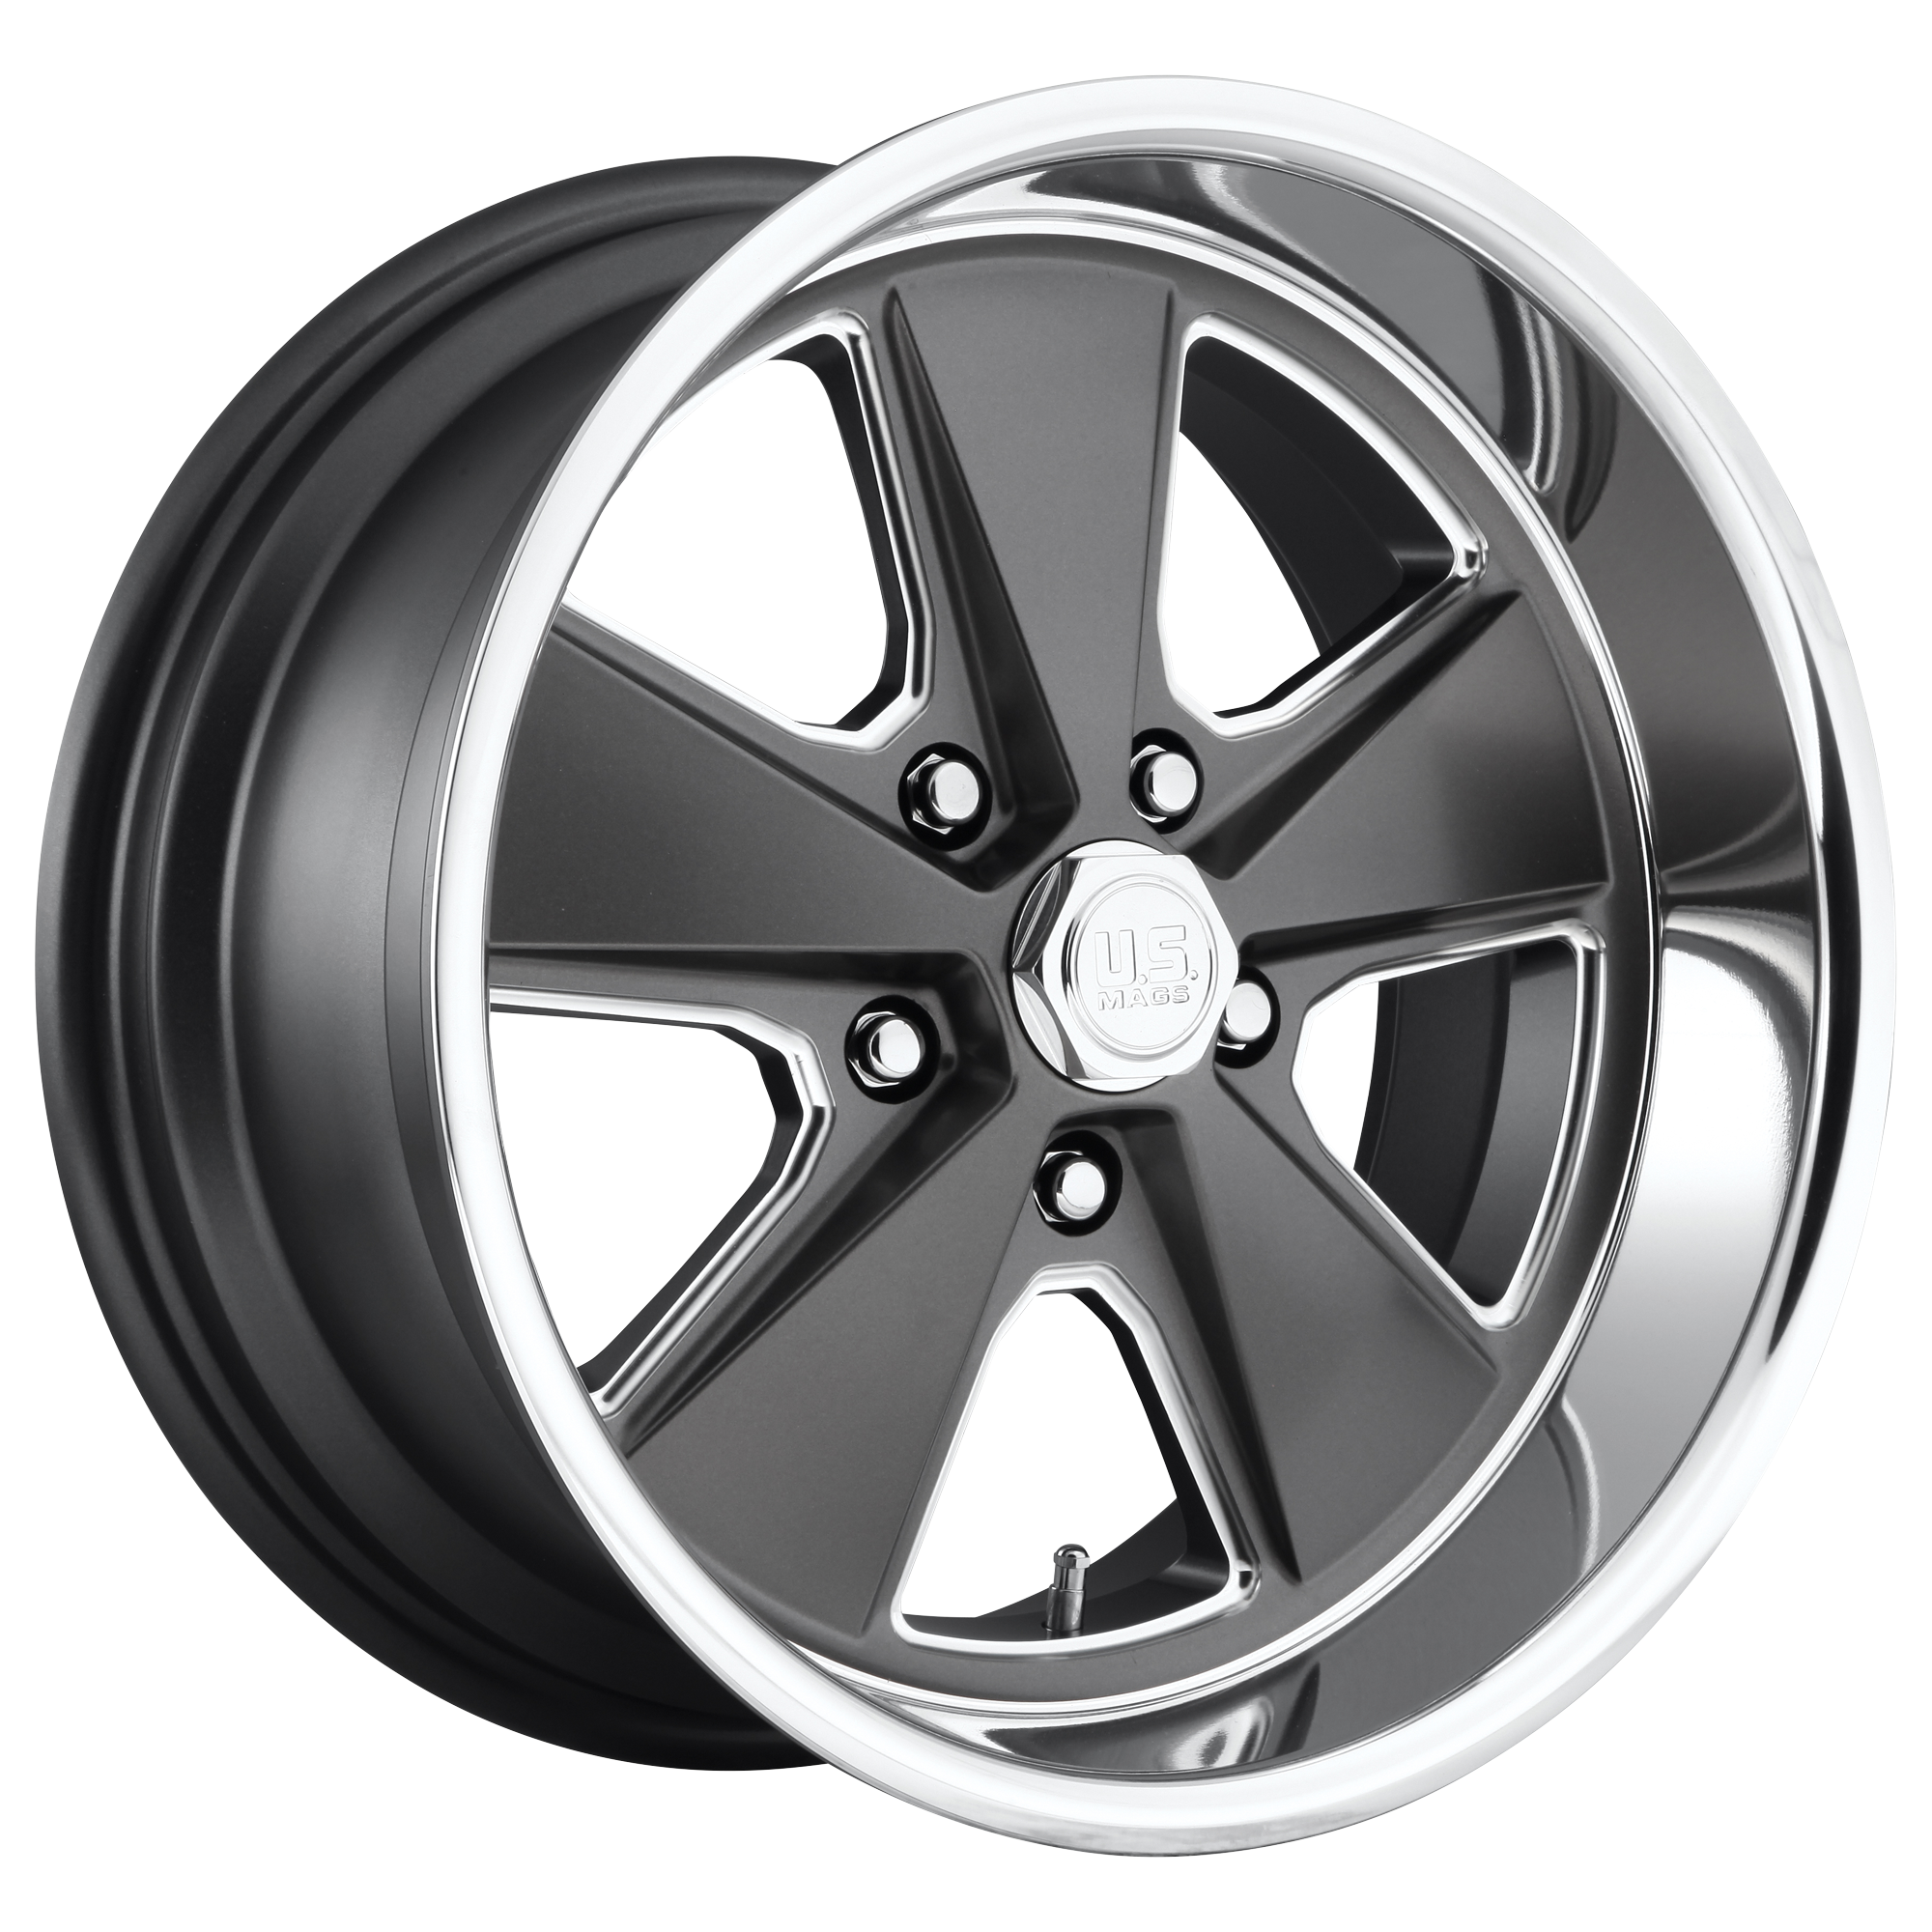 ROADSTER 20x9.5 5x127.00 MATTE GUN METAL MACHINED (1 mm) - Tires and Engine Performance